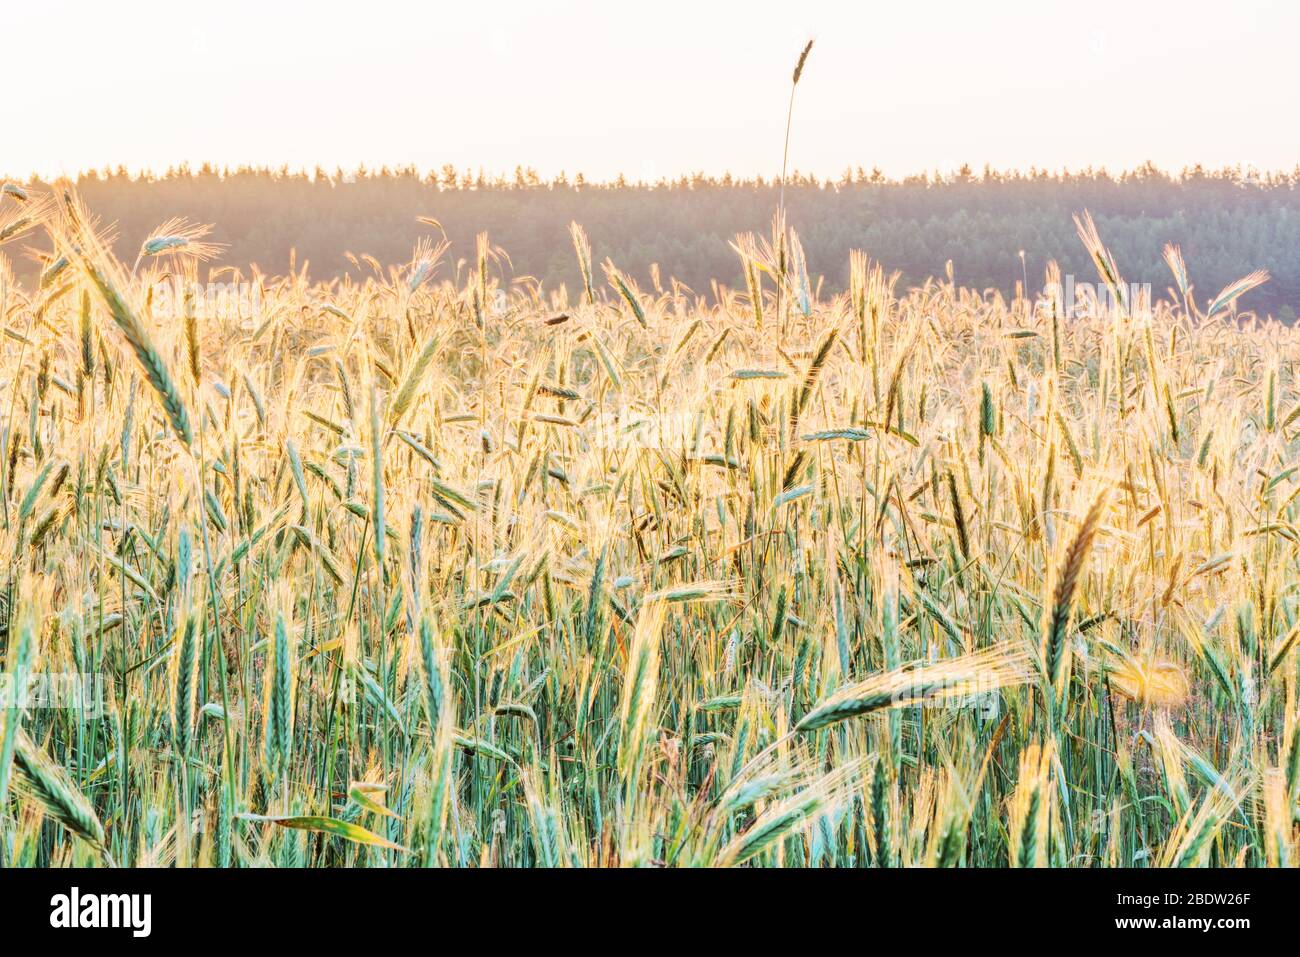 Green wheat field in the sunlight of dawn. Stock Photo